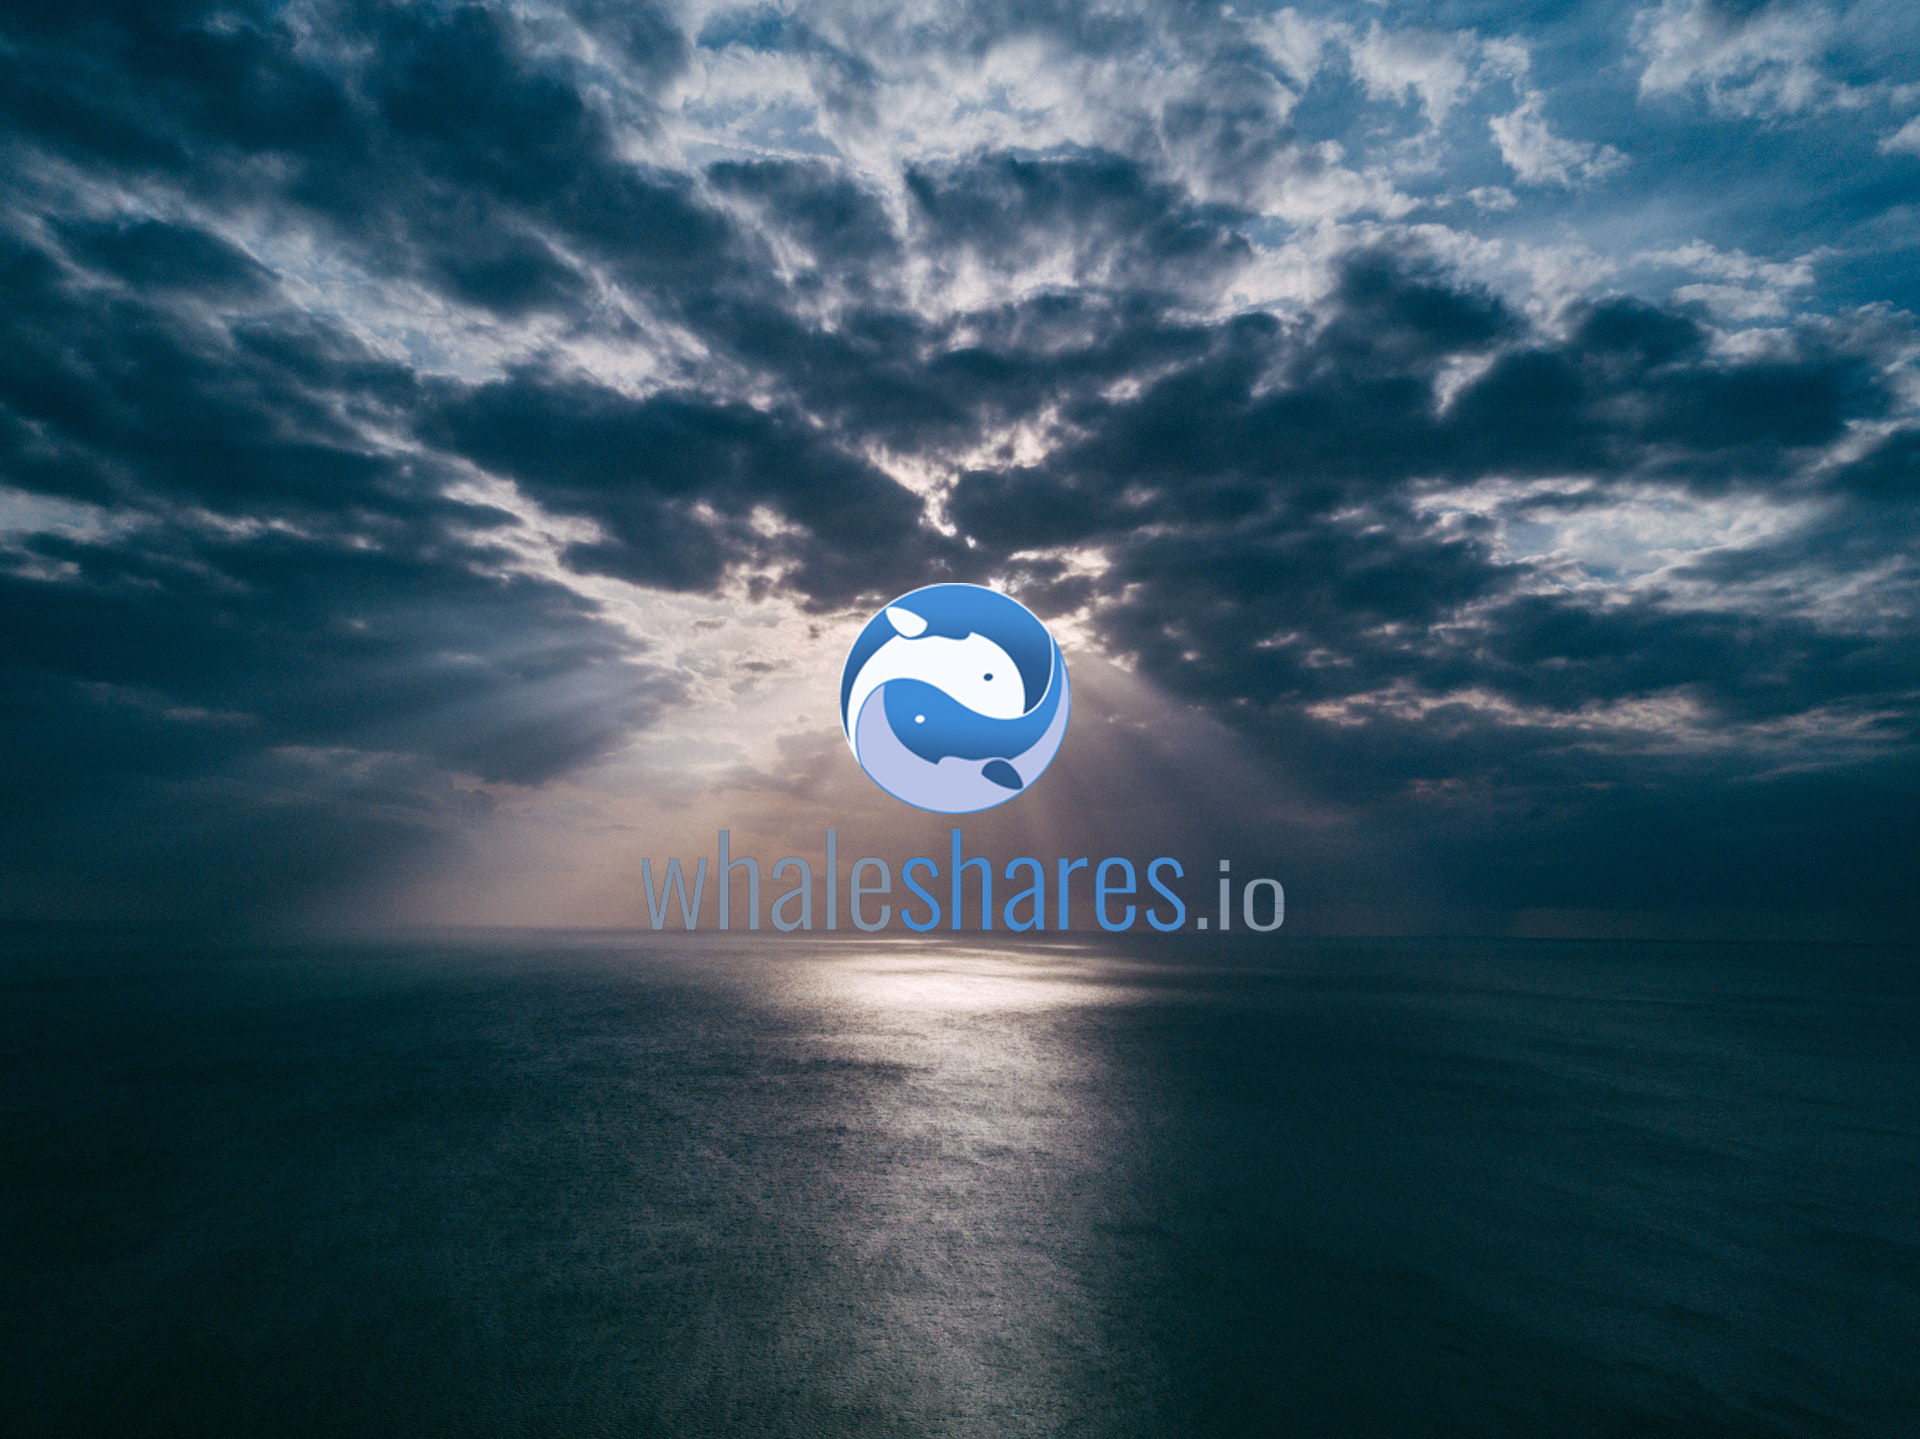 whaleshares-wallpaper-0.png